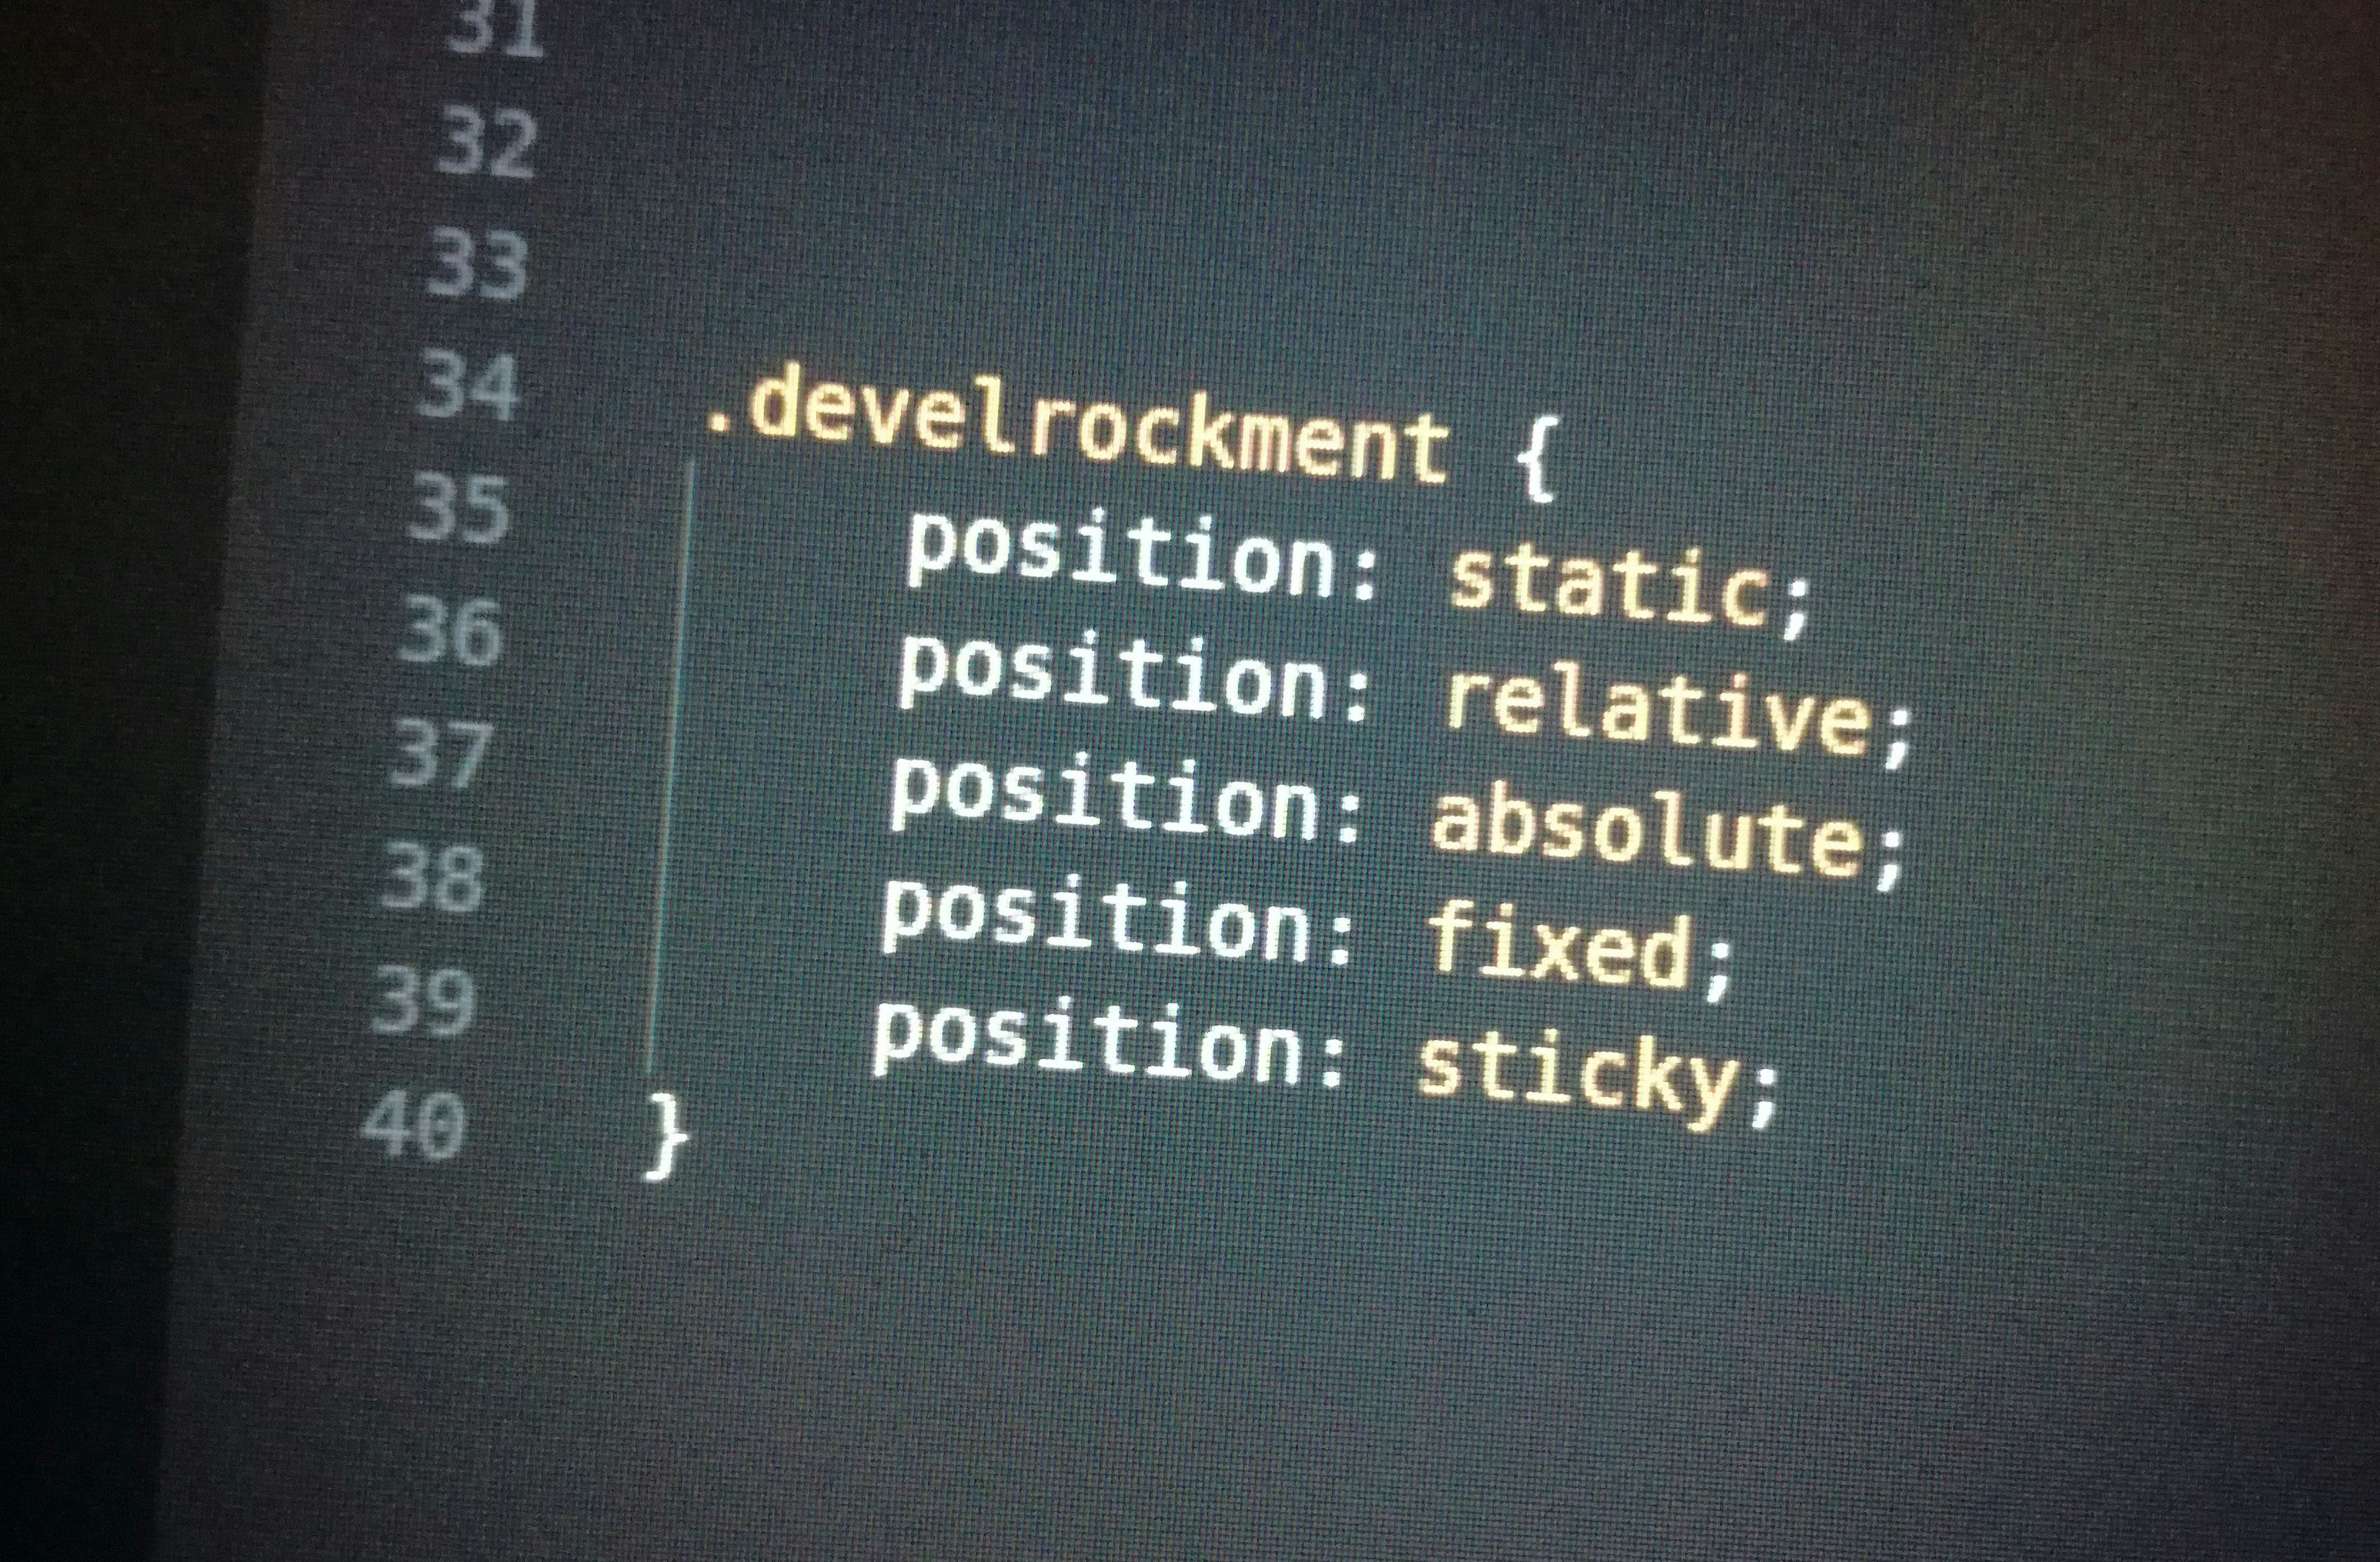 CSS Positioning